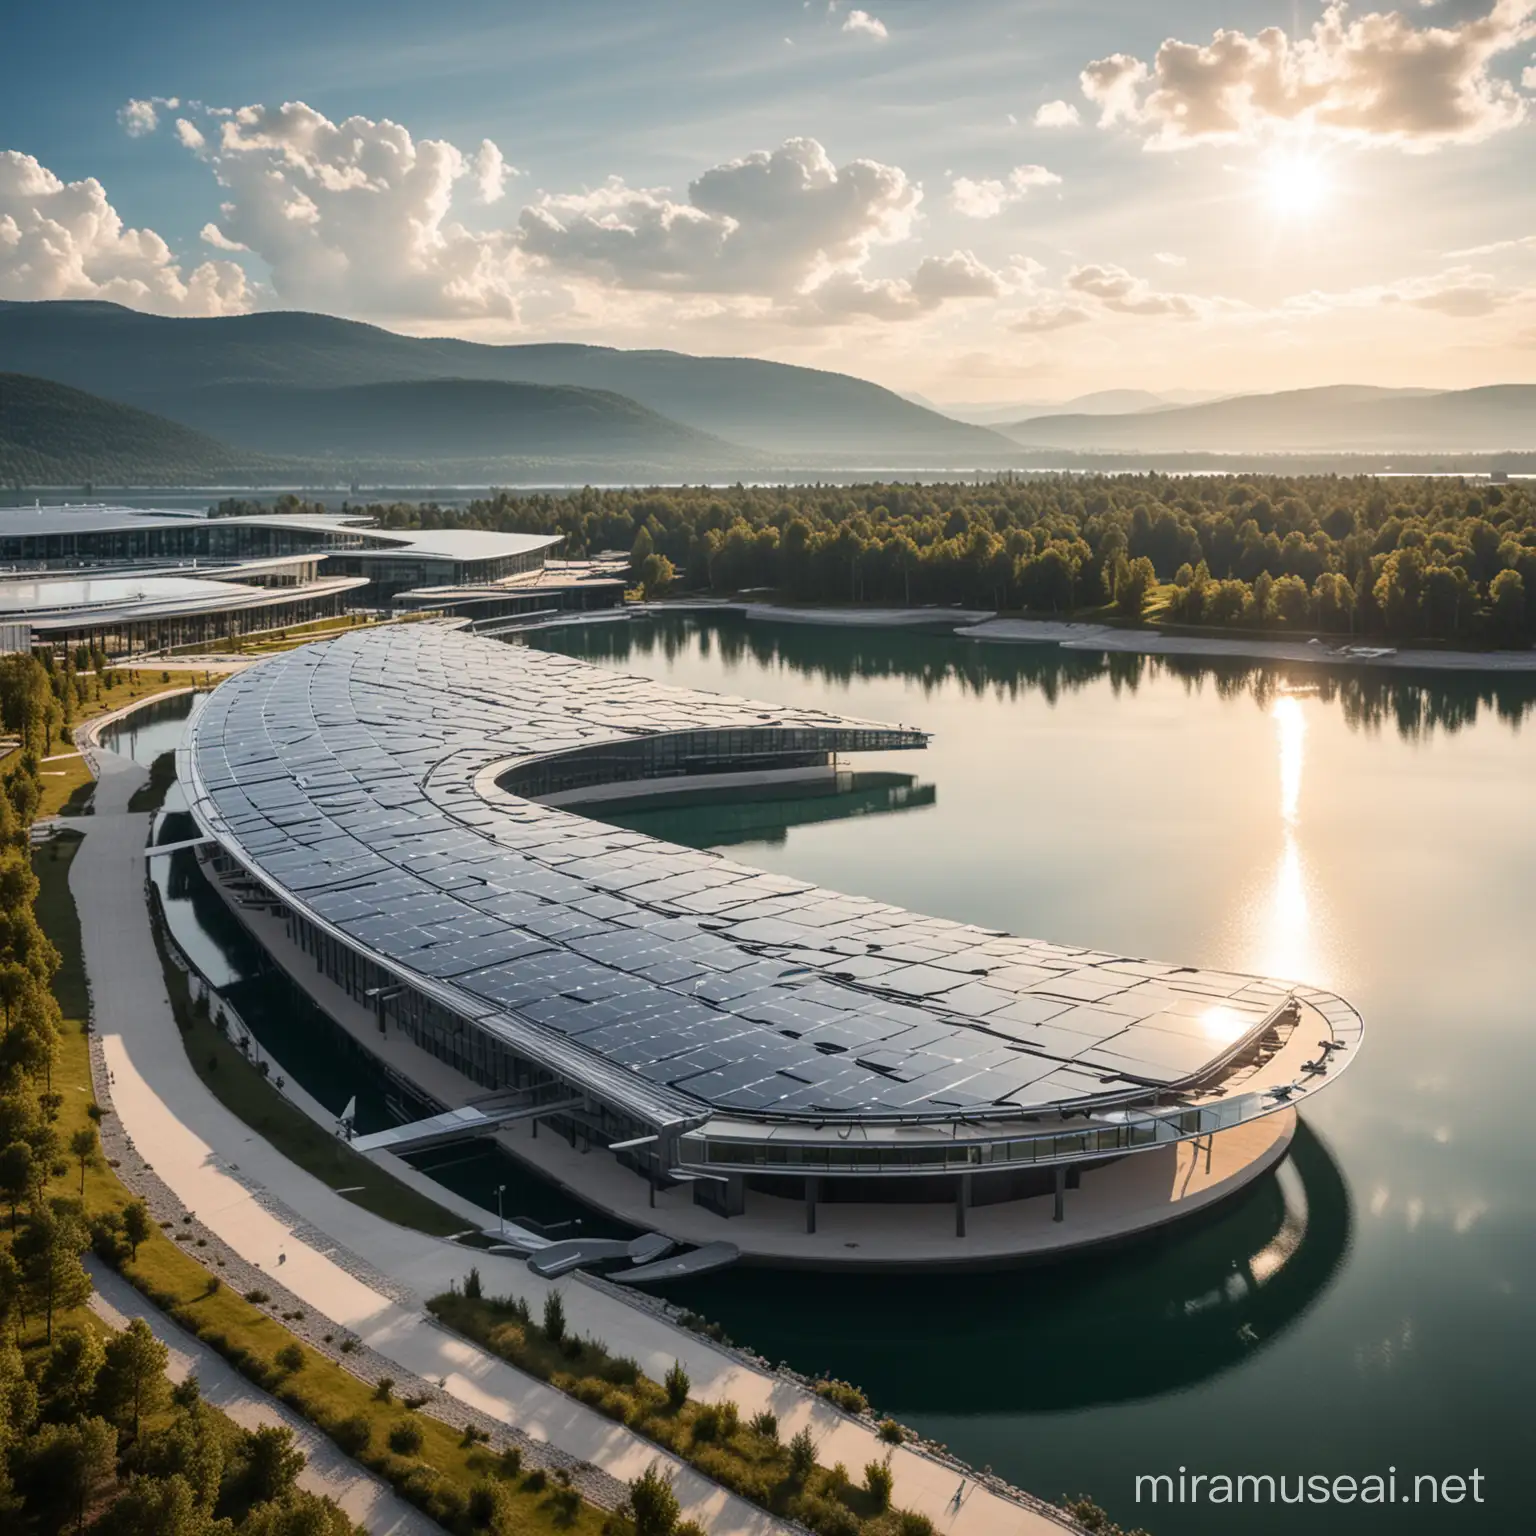 Futuristic Solar Roof on Conference Building Overlooking Lake